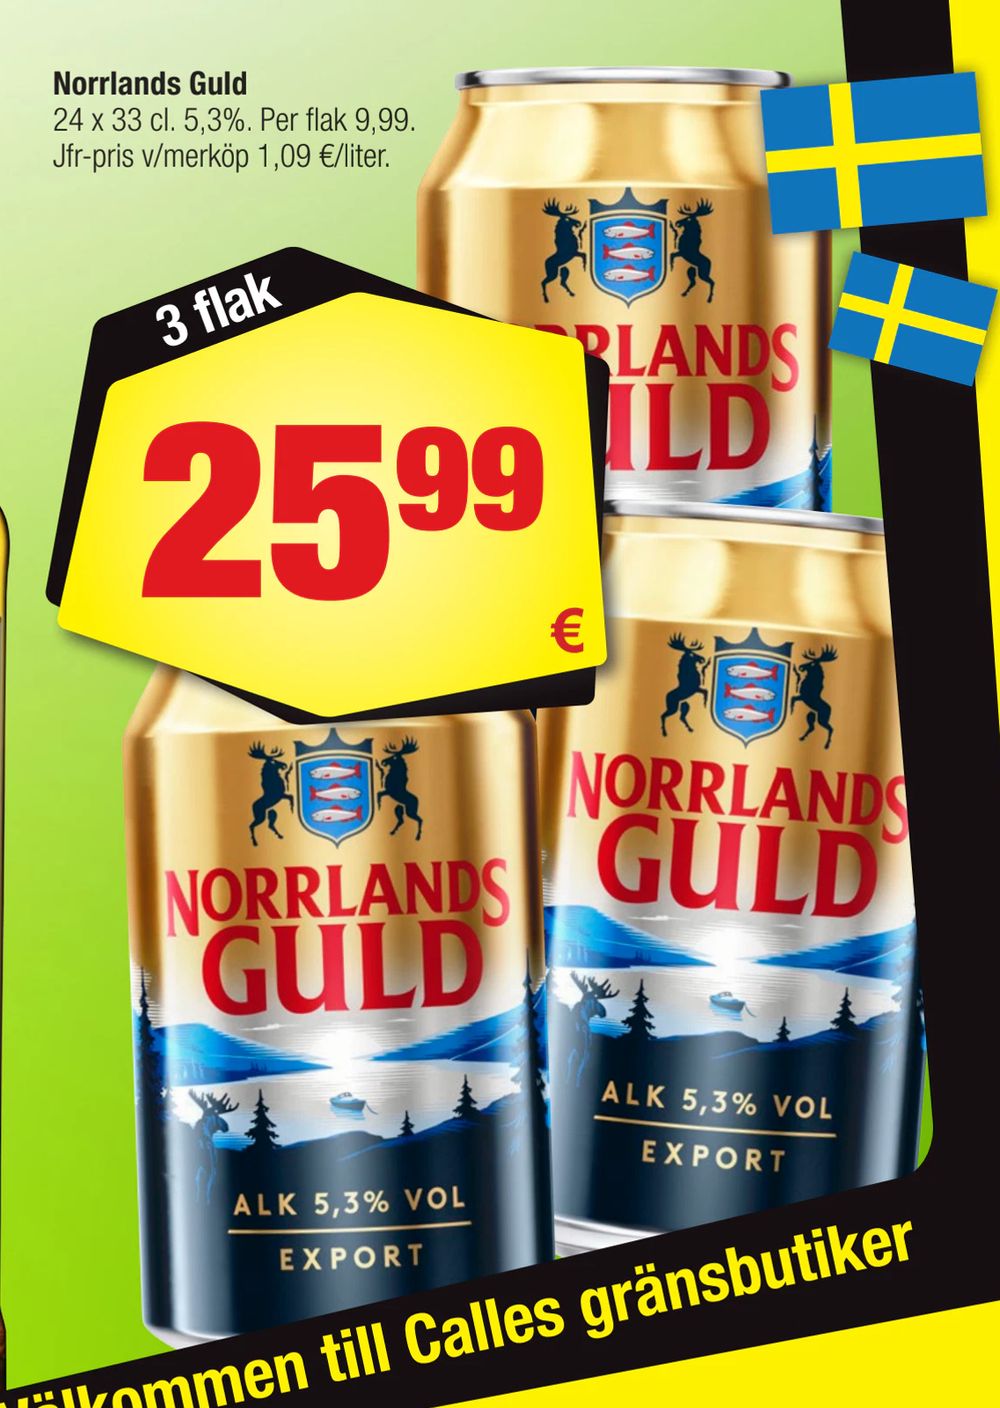 Deals on Norrlands Guld from Calle at 25,99 €